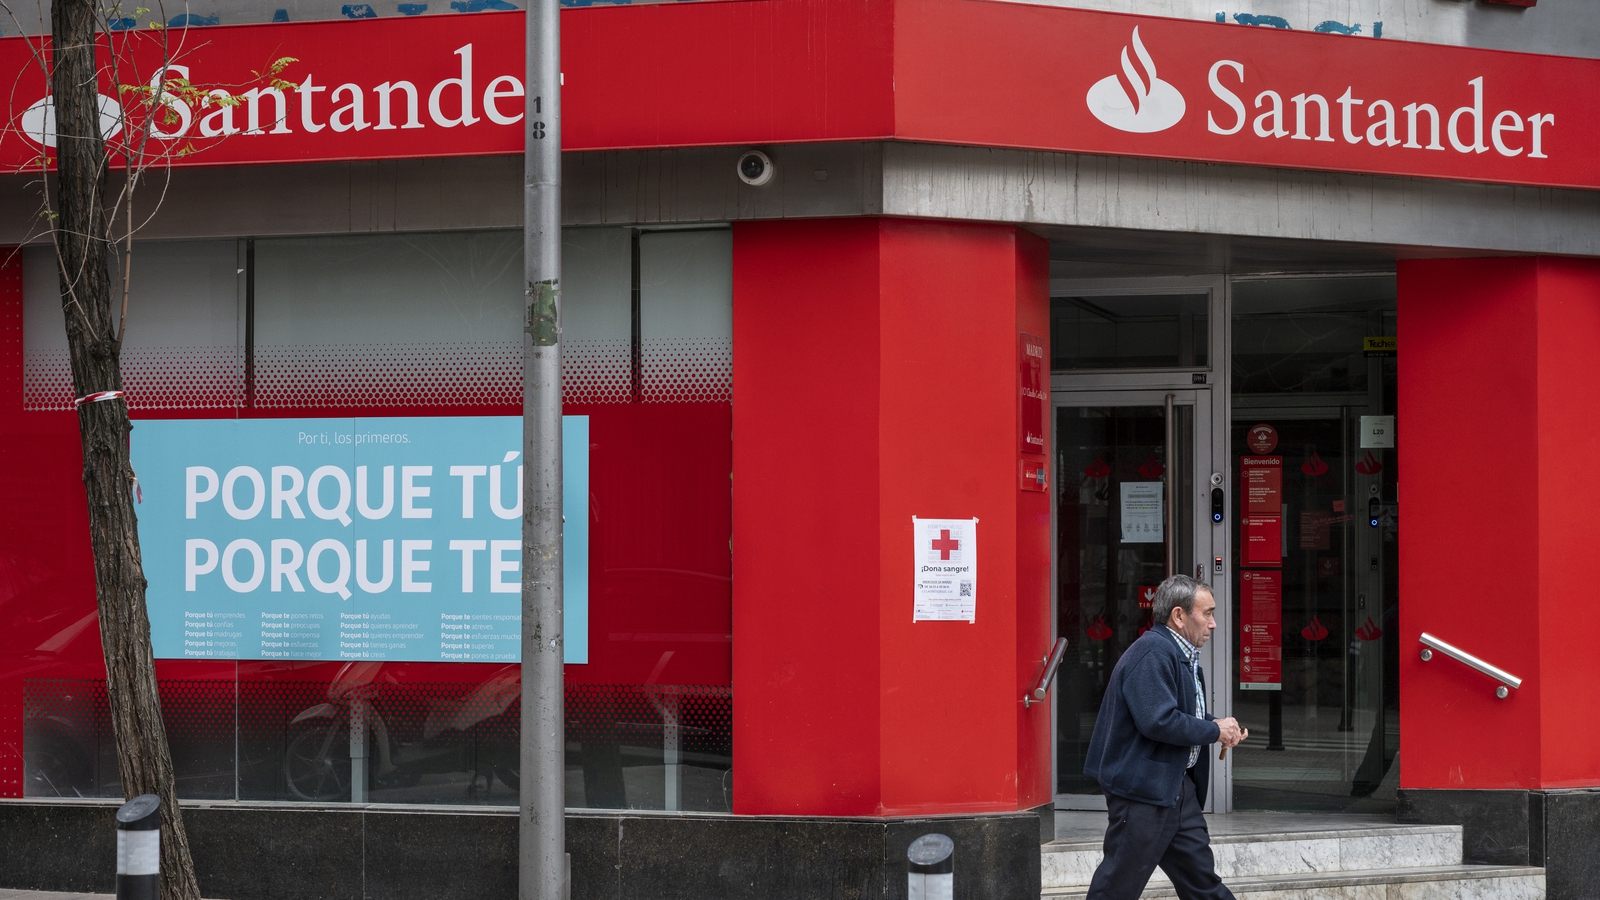 Santander profits boosted by Europe, costs rise in Brazil